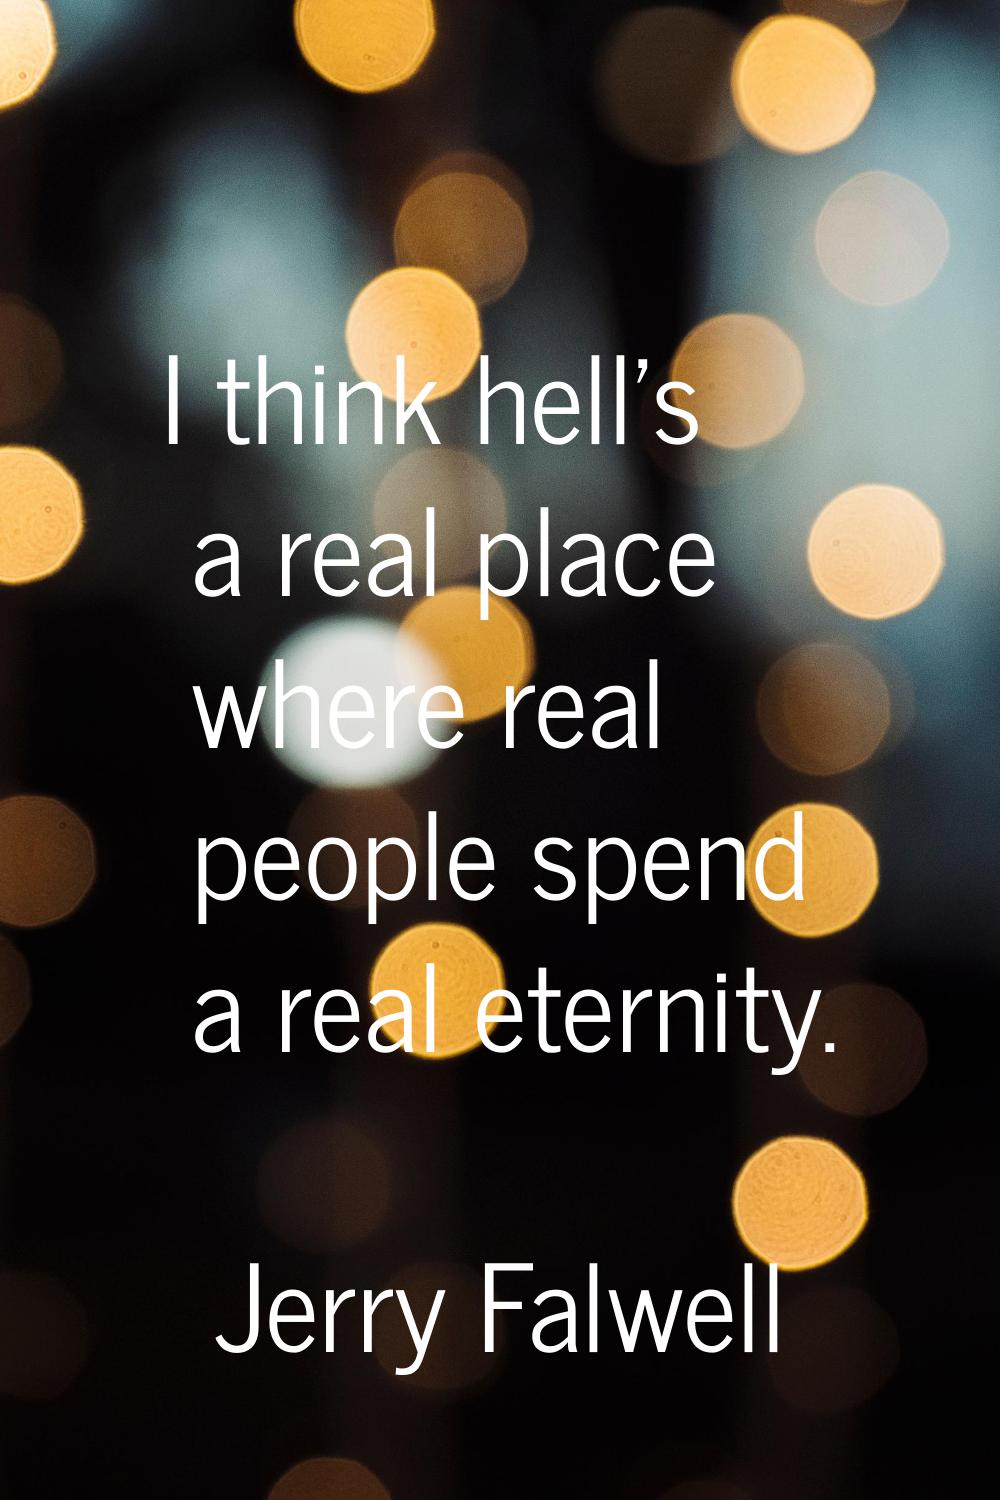 I think hell's a real place where real people spend a real eternity.